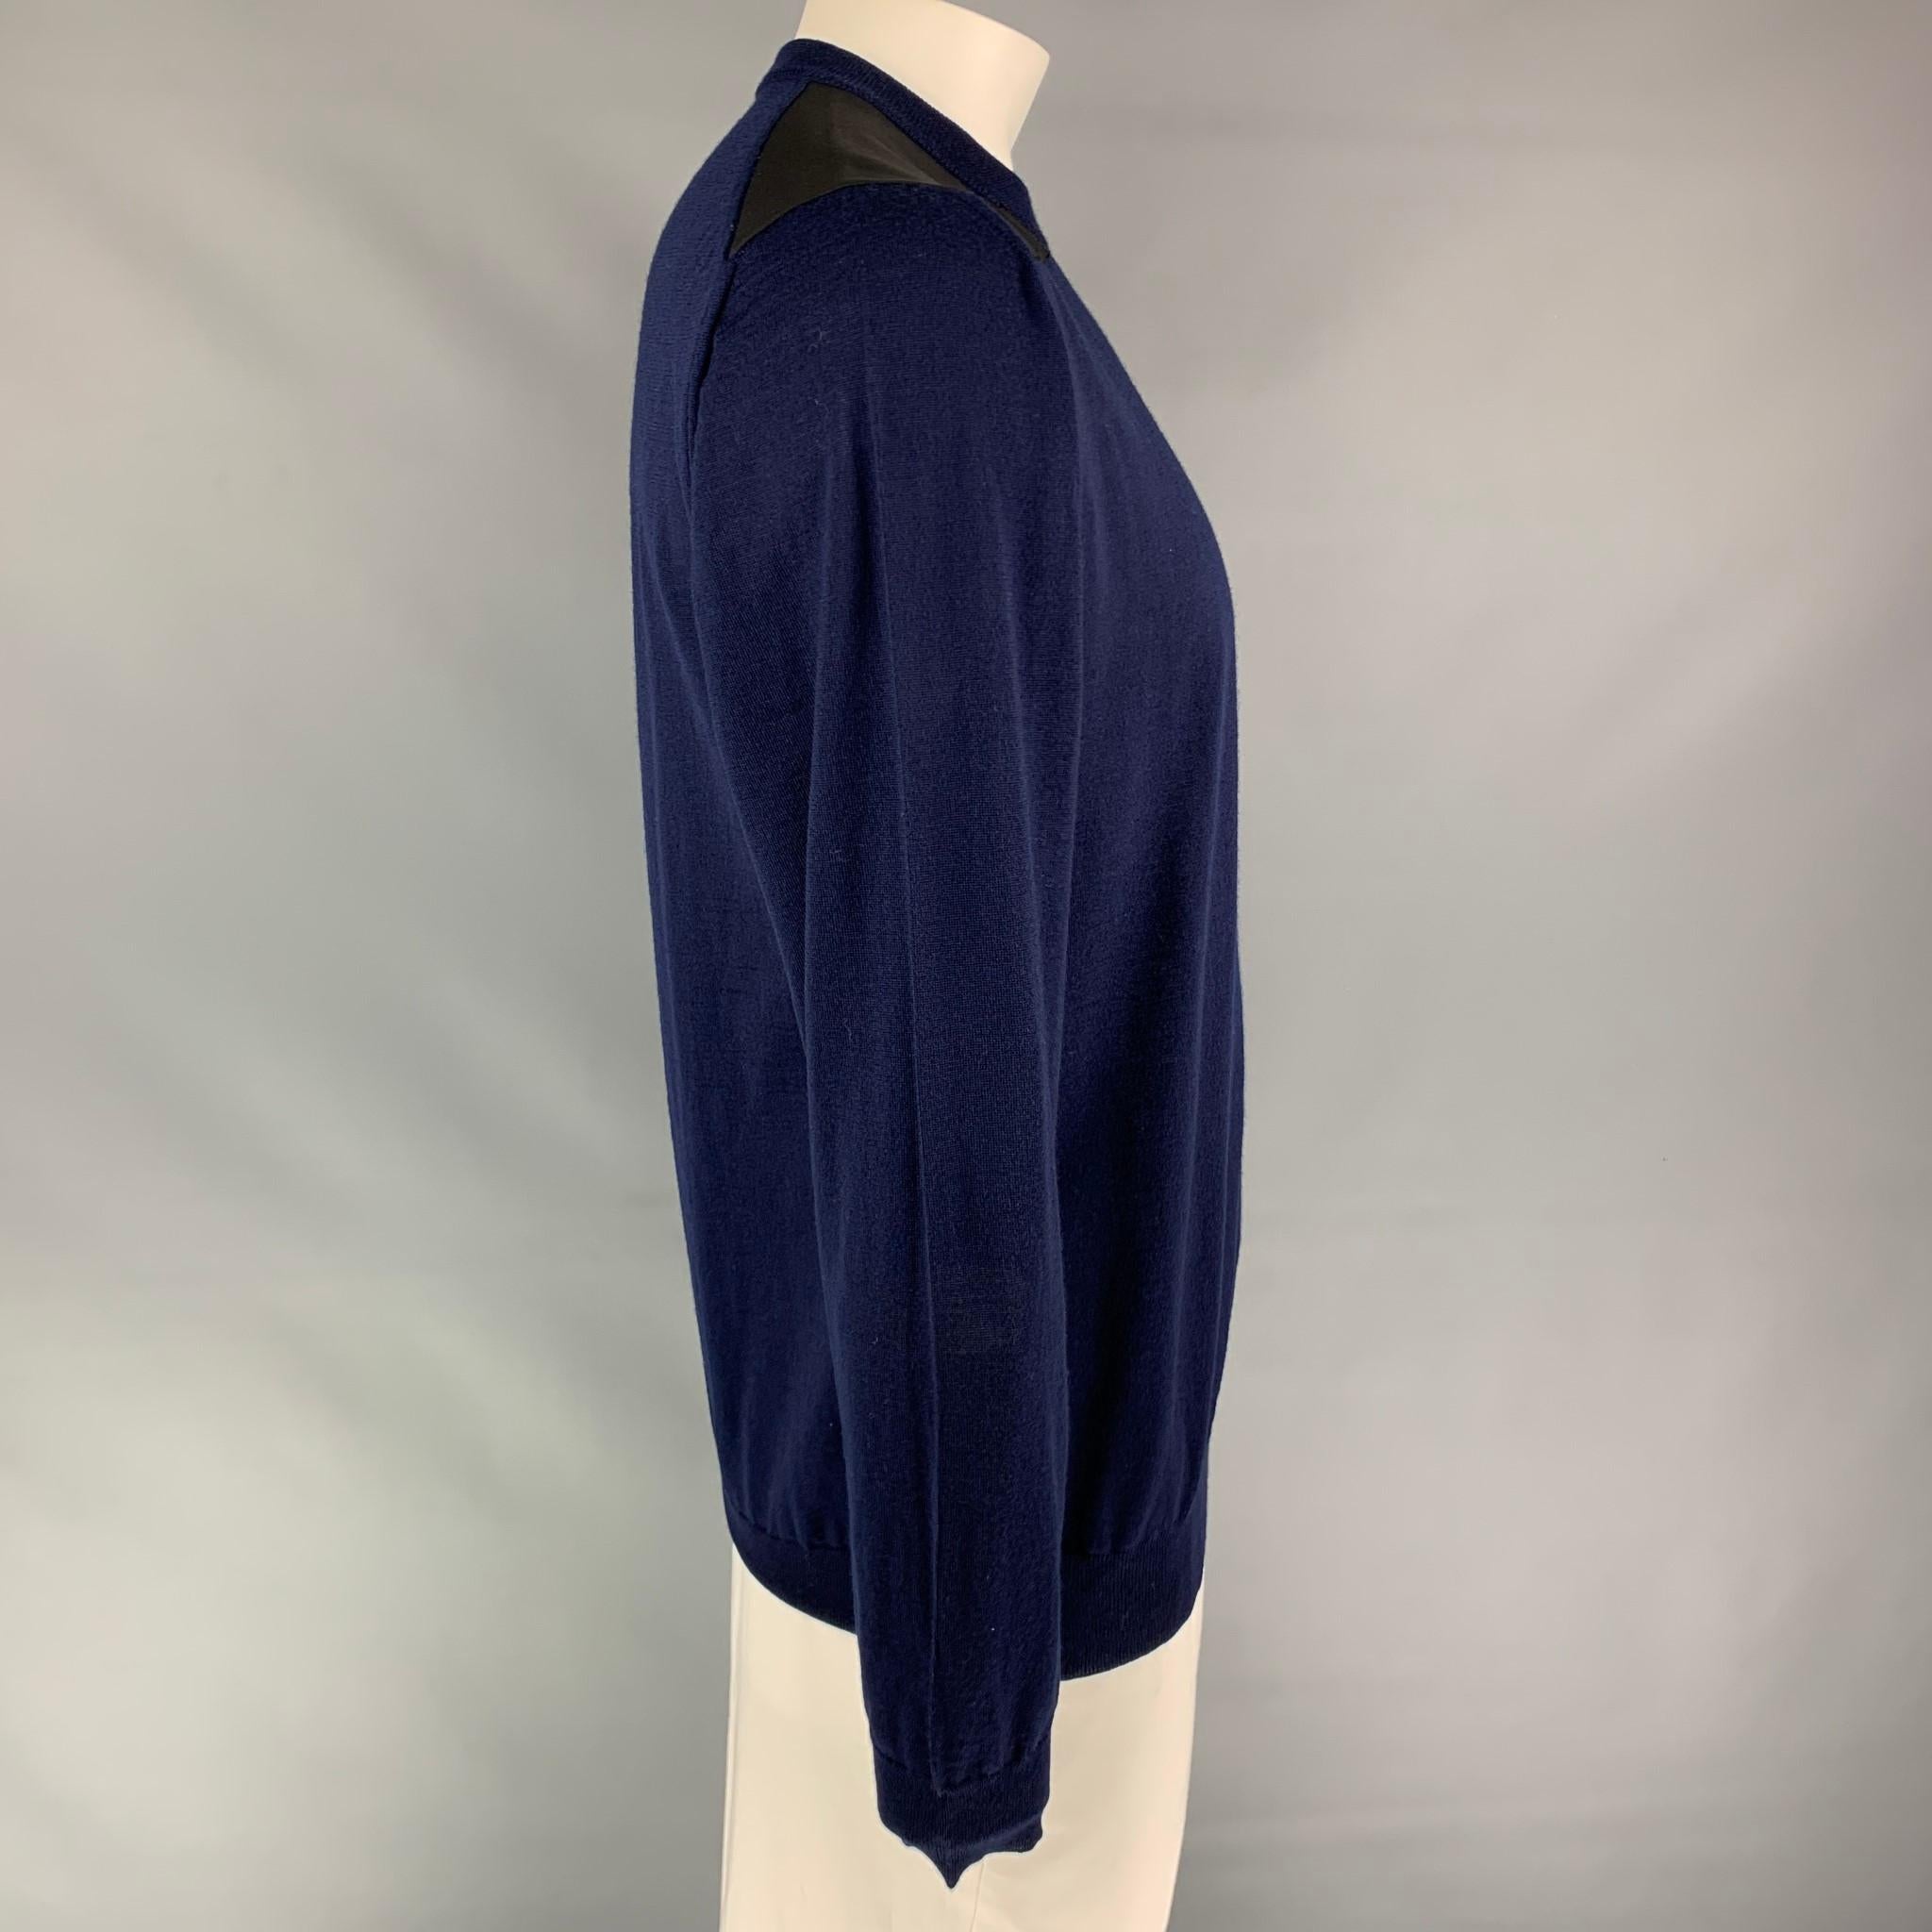 LANVIN pullover comes in a navy knitted wool featuring black shoulder patches and a crew-neck. Made in Italy.

New With Tags. 
Marked: XXL

Measurements:

Shoulder: 17.5 in.
Chest: 44 in.
Sleeve: 28 in.
Length: 28.5 in. 

SKU: 110405
Category: